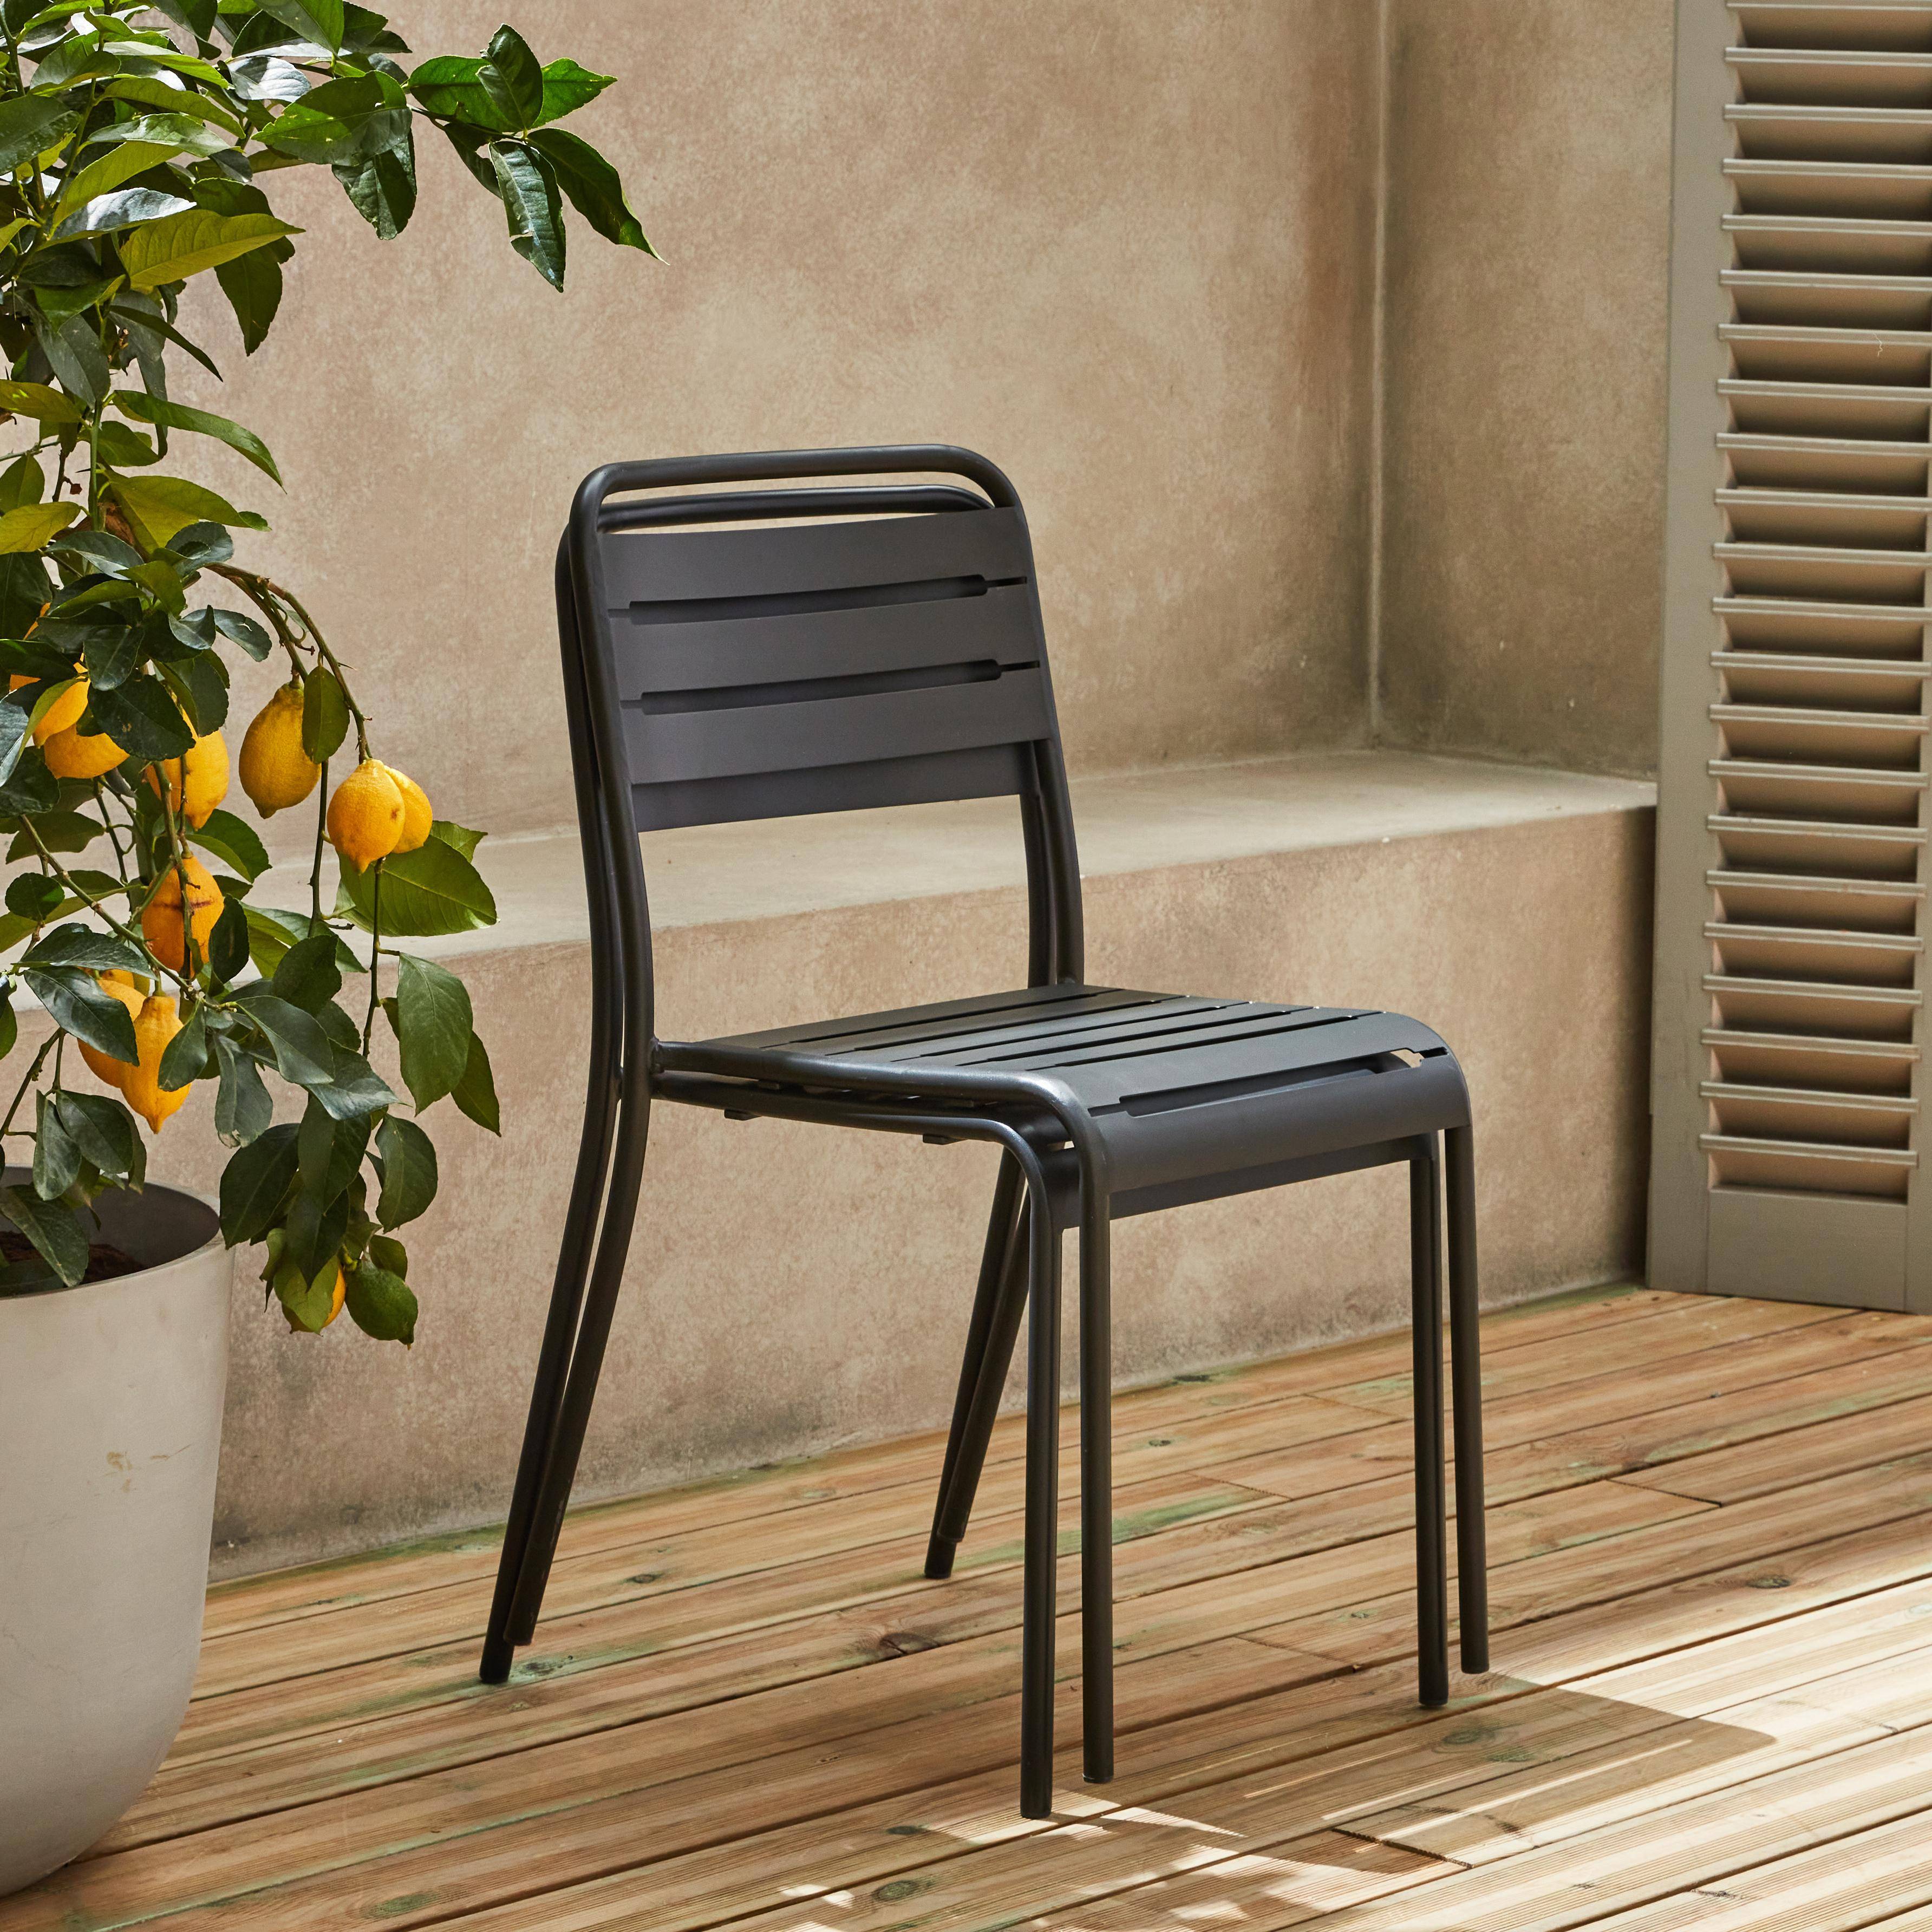 Pair of bistro steel garden chairs, stackable, W44xD52xH79cm, Anthracite,sweeek,Photo3